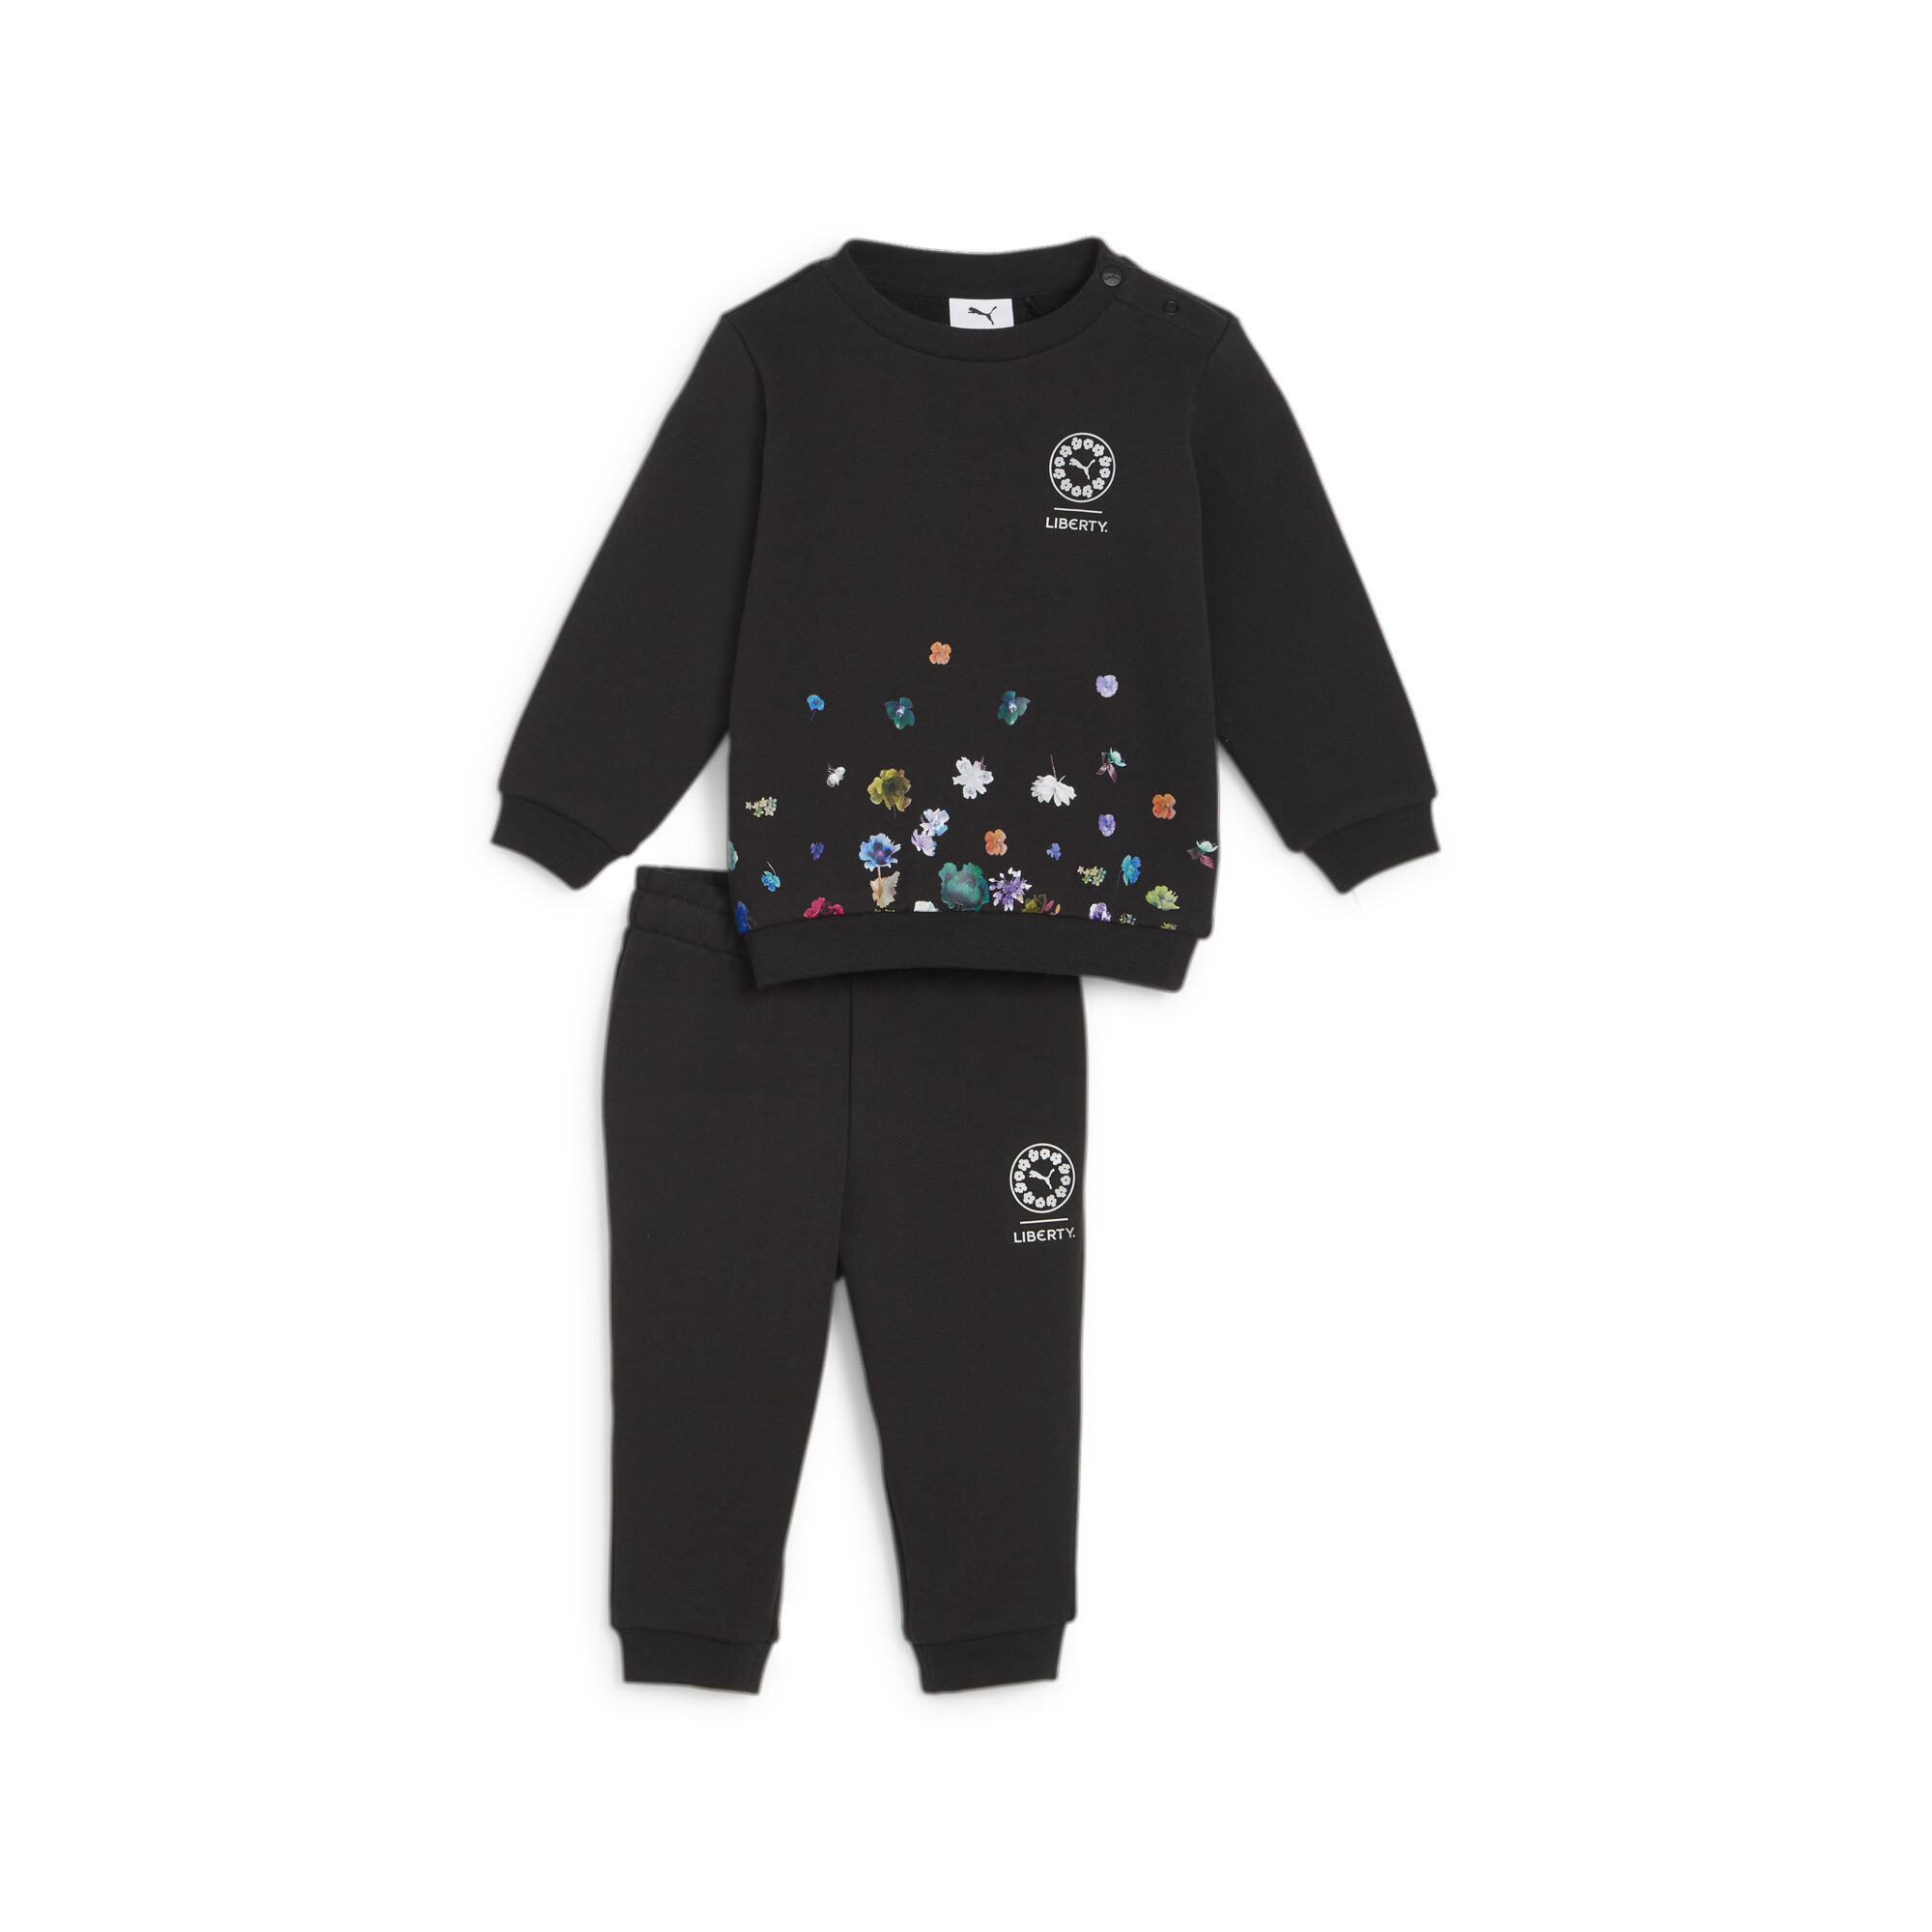 Kids' PUMA X LIBERTY Toddlers' Jogger Set In Black, Size 12-18 Months